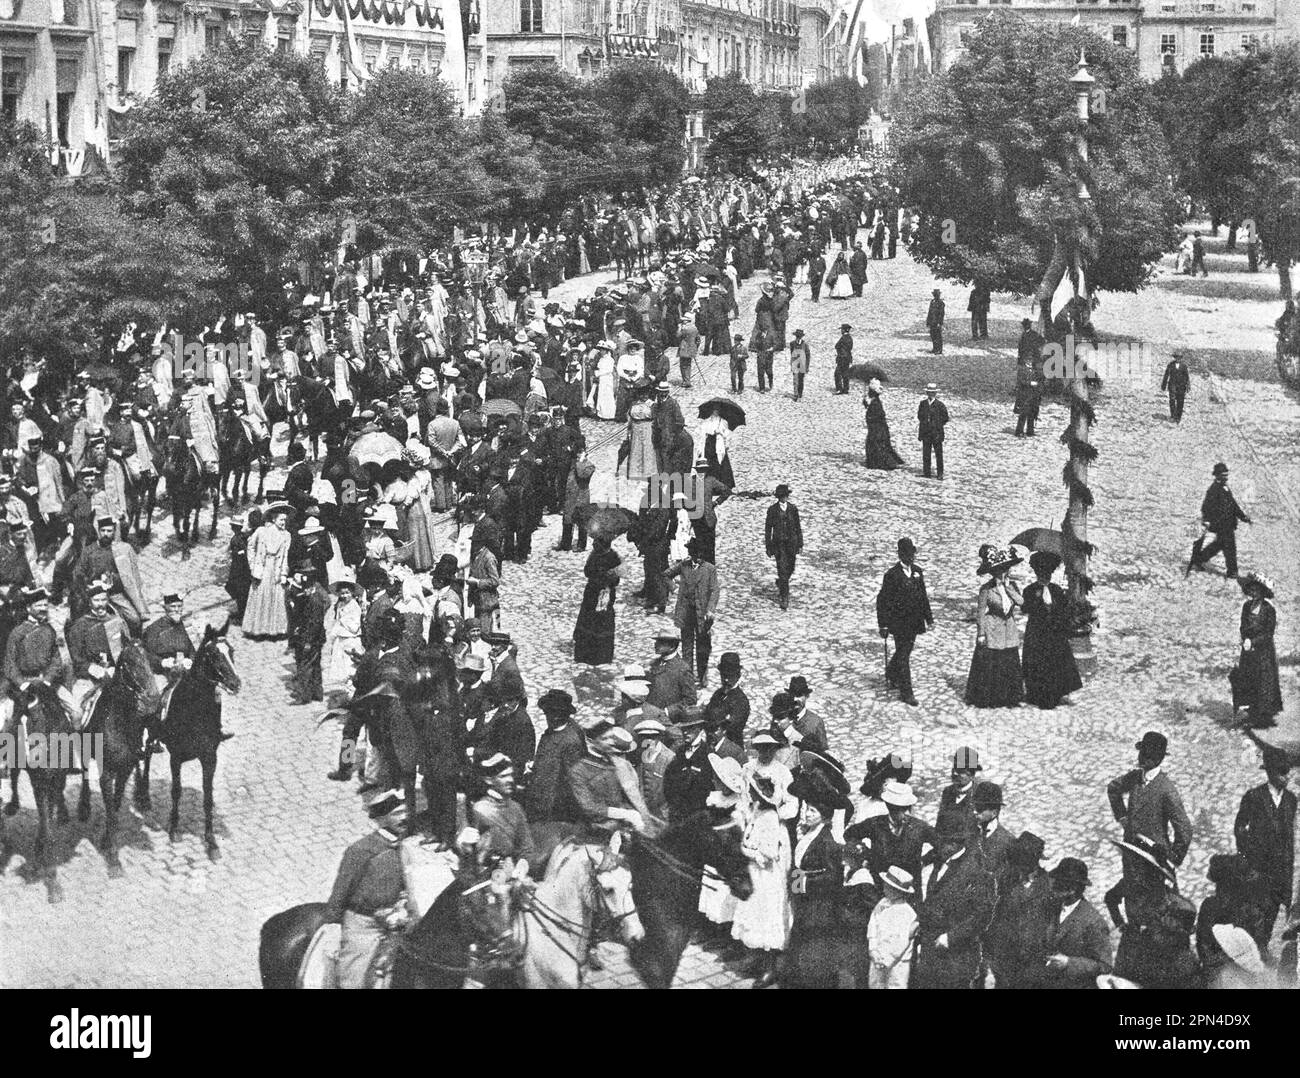 Celebrations in Krakow in honor of the 500th anniversary of the Battle of Grunwald. Photo from 1910. Stock Photo